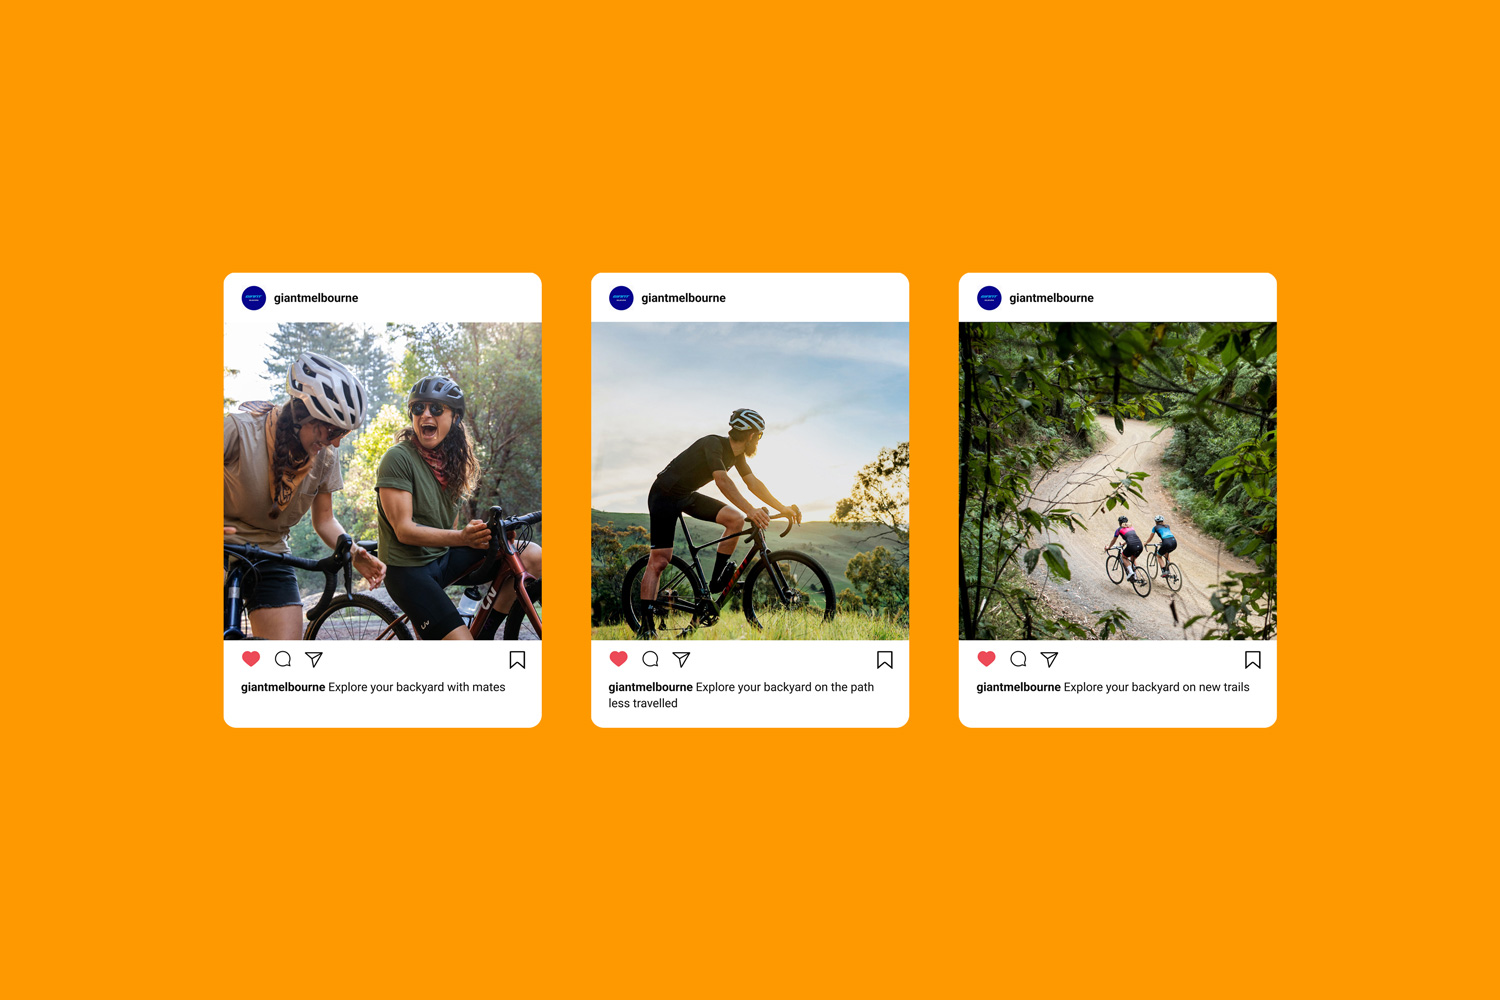 Carousel of social media posts done by WOO Agency for Giant Bikes